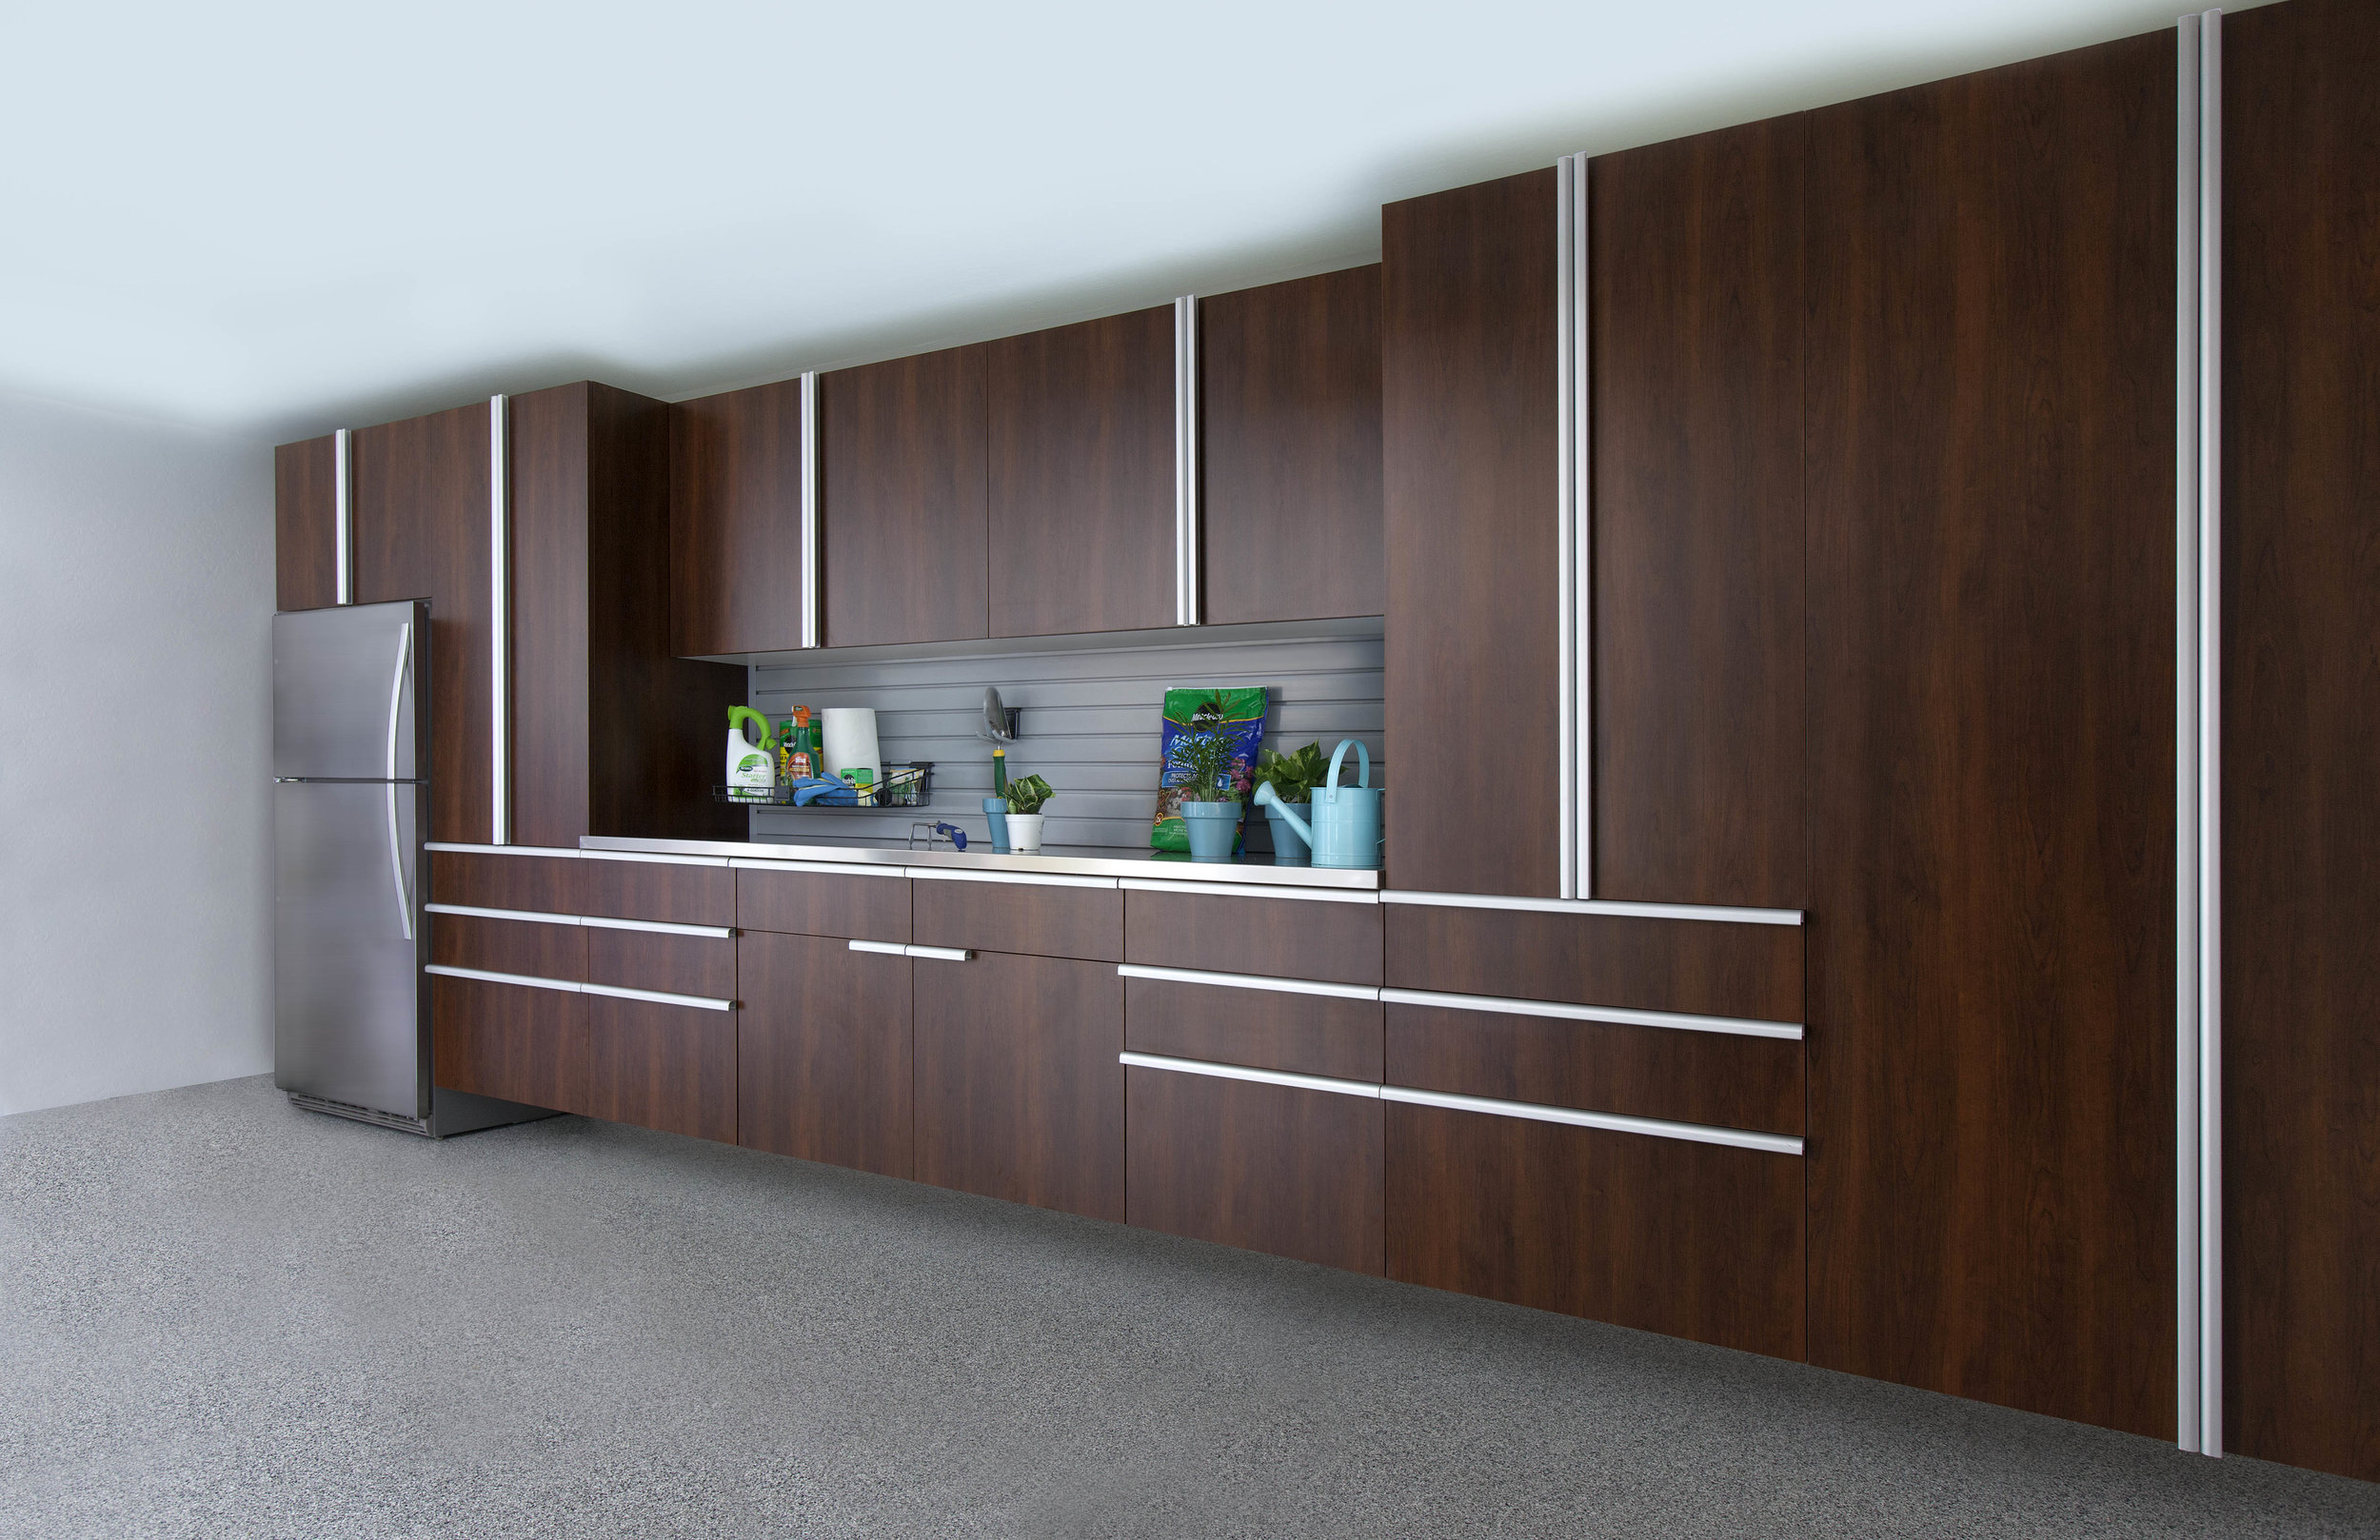 Coco Garage-Extruded Handles-Stainless Workbench-Slatwall-Smoke Floor-ANGLE-Fetch-Sep 2013.jpg